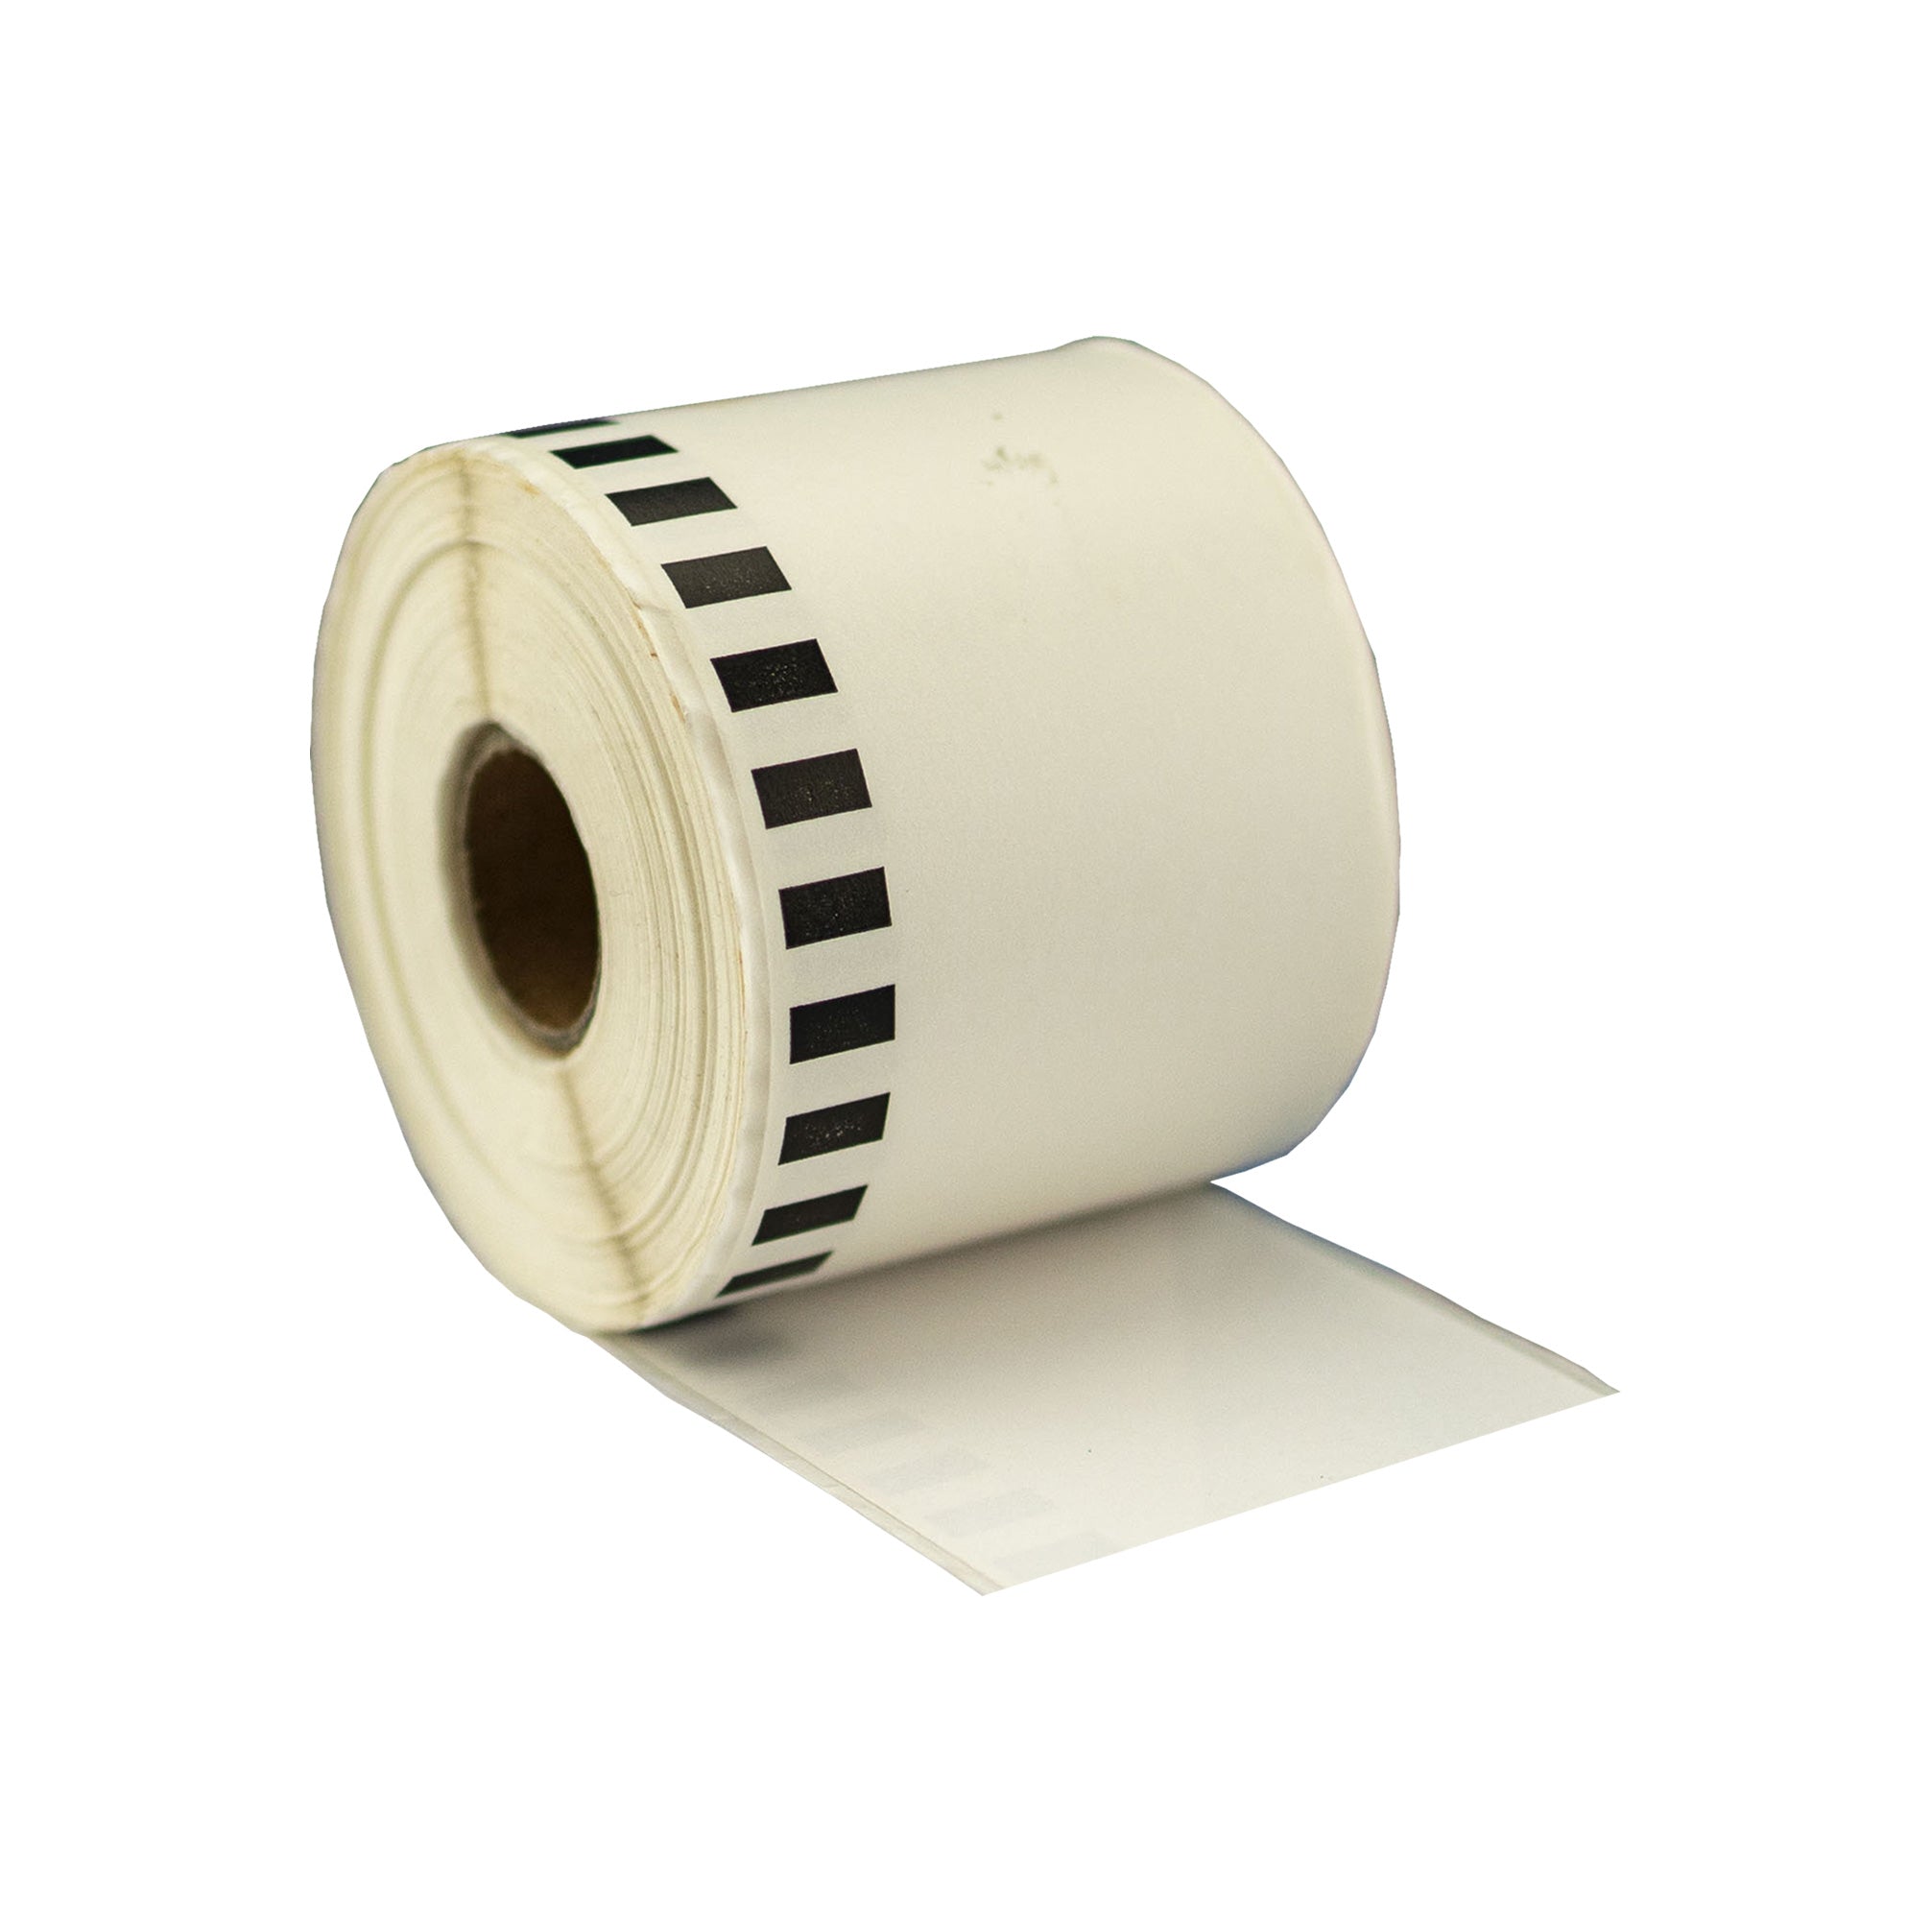 Compatible Brother DK-22205 Refill Label Tapes 62mm x 30.4m/ 50 Rolls